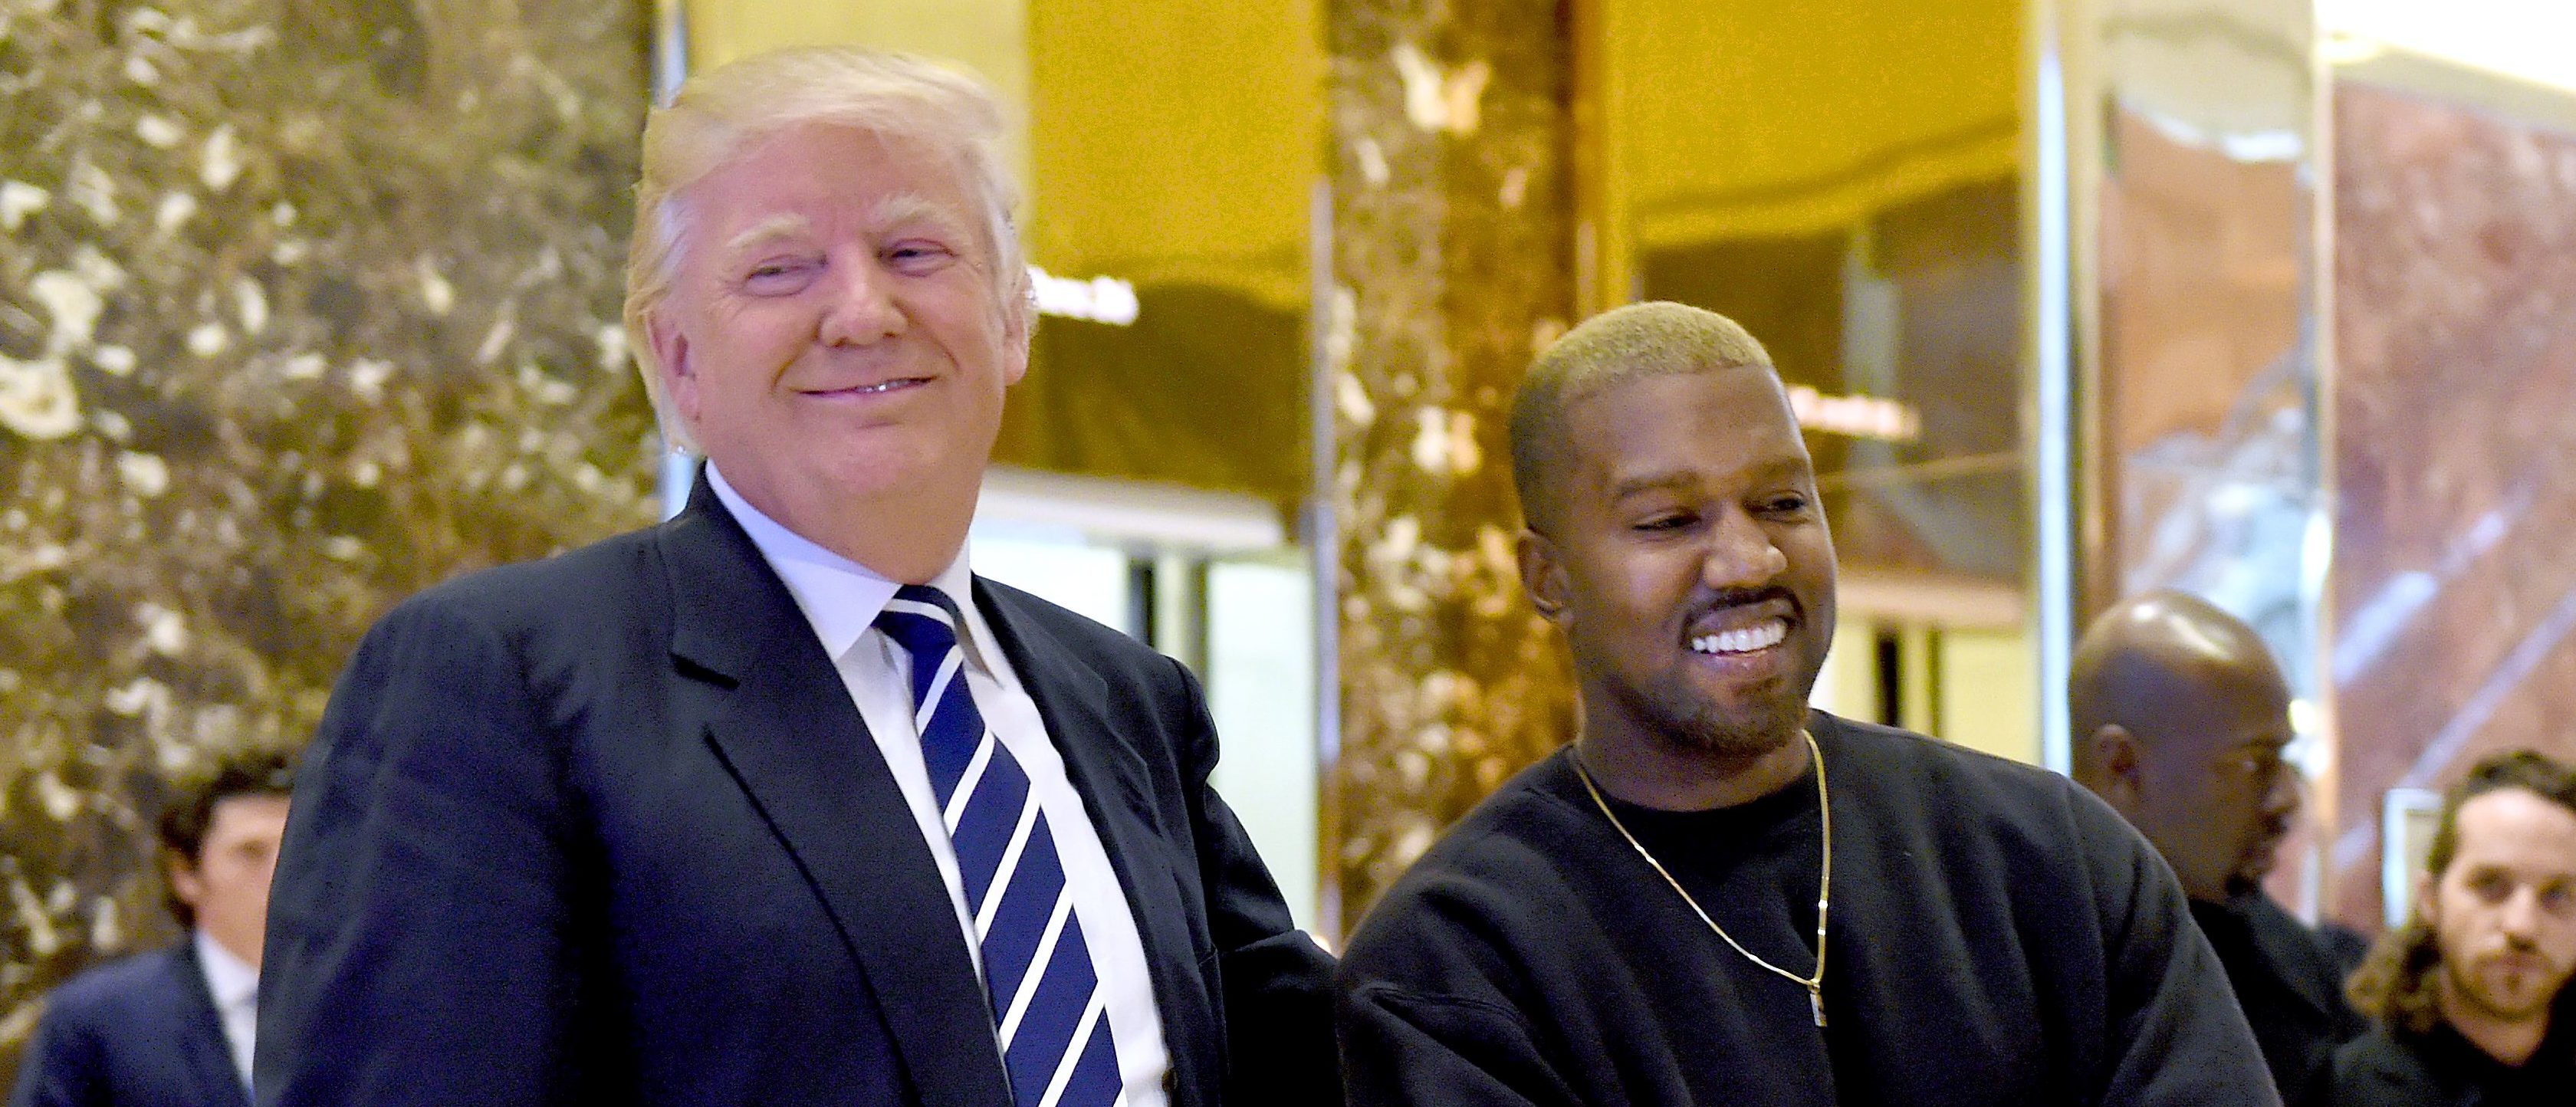 Singer Kanye West and President-elect Donald Trump speak with the press after their meetings at Trump Tower December 13, 2016 in New York. / AFP PHOTO / TIMOTHY A. CLARY (Photo credit should read TIMOTHY A. CLARY/AFP/Getty Images)